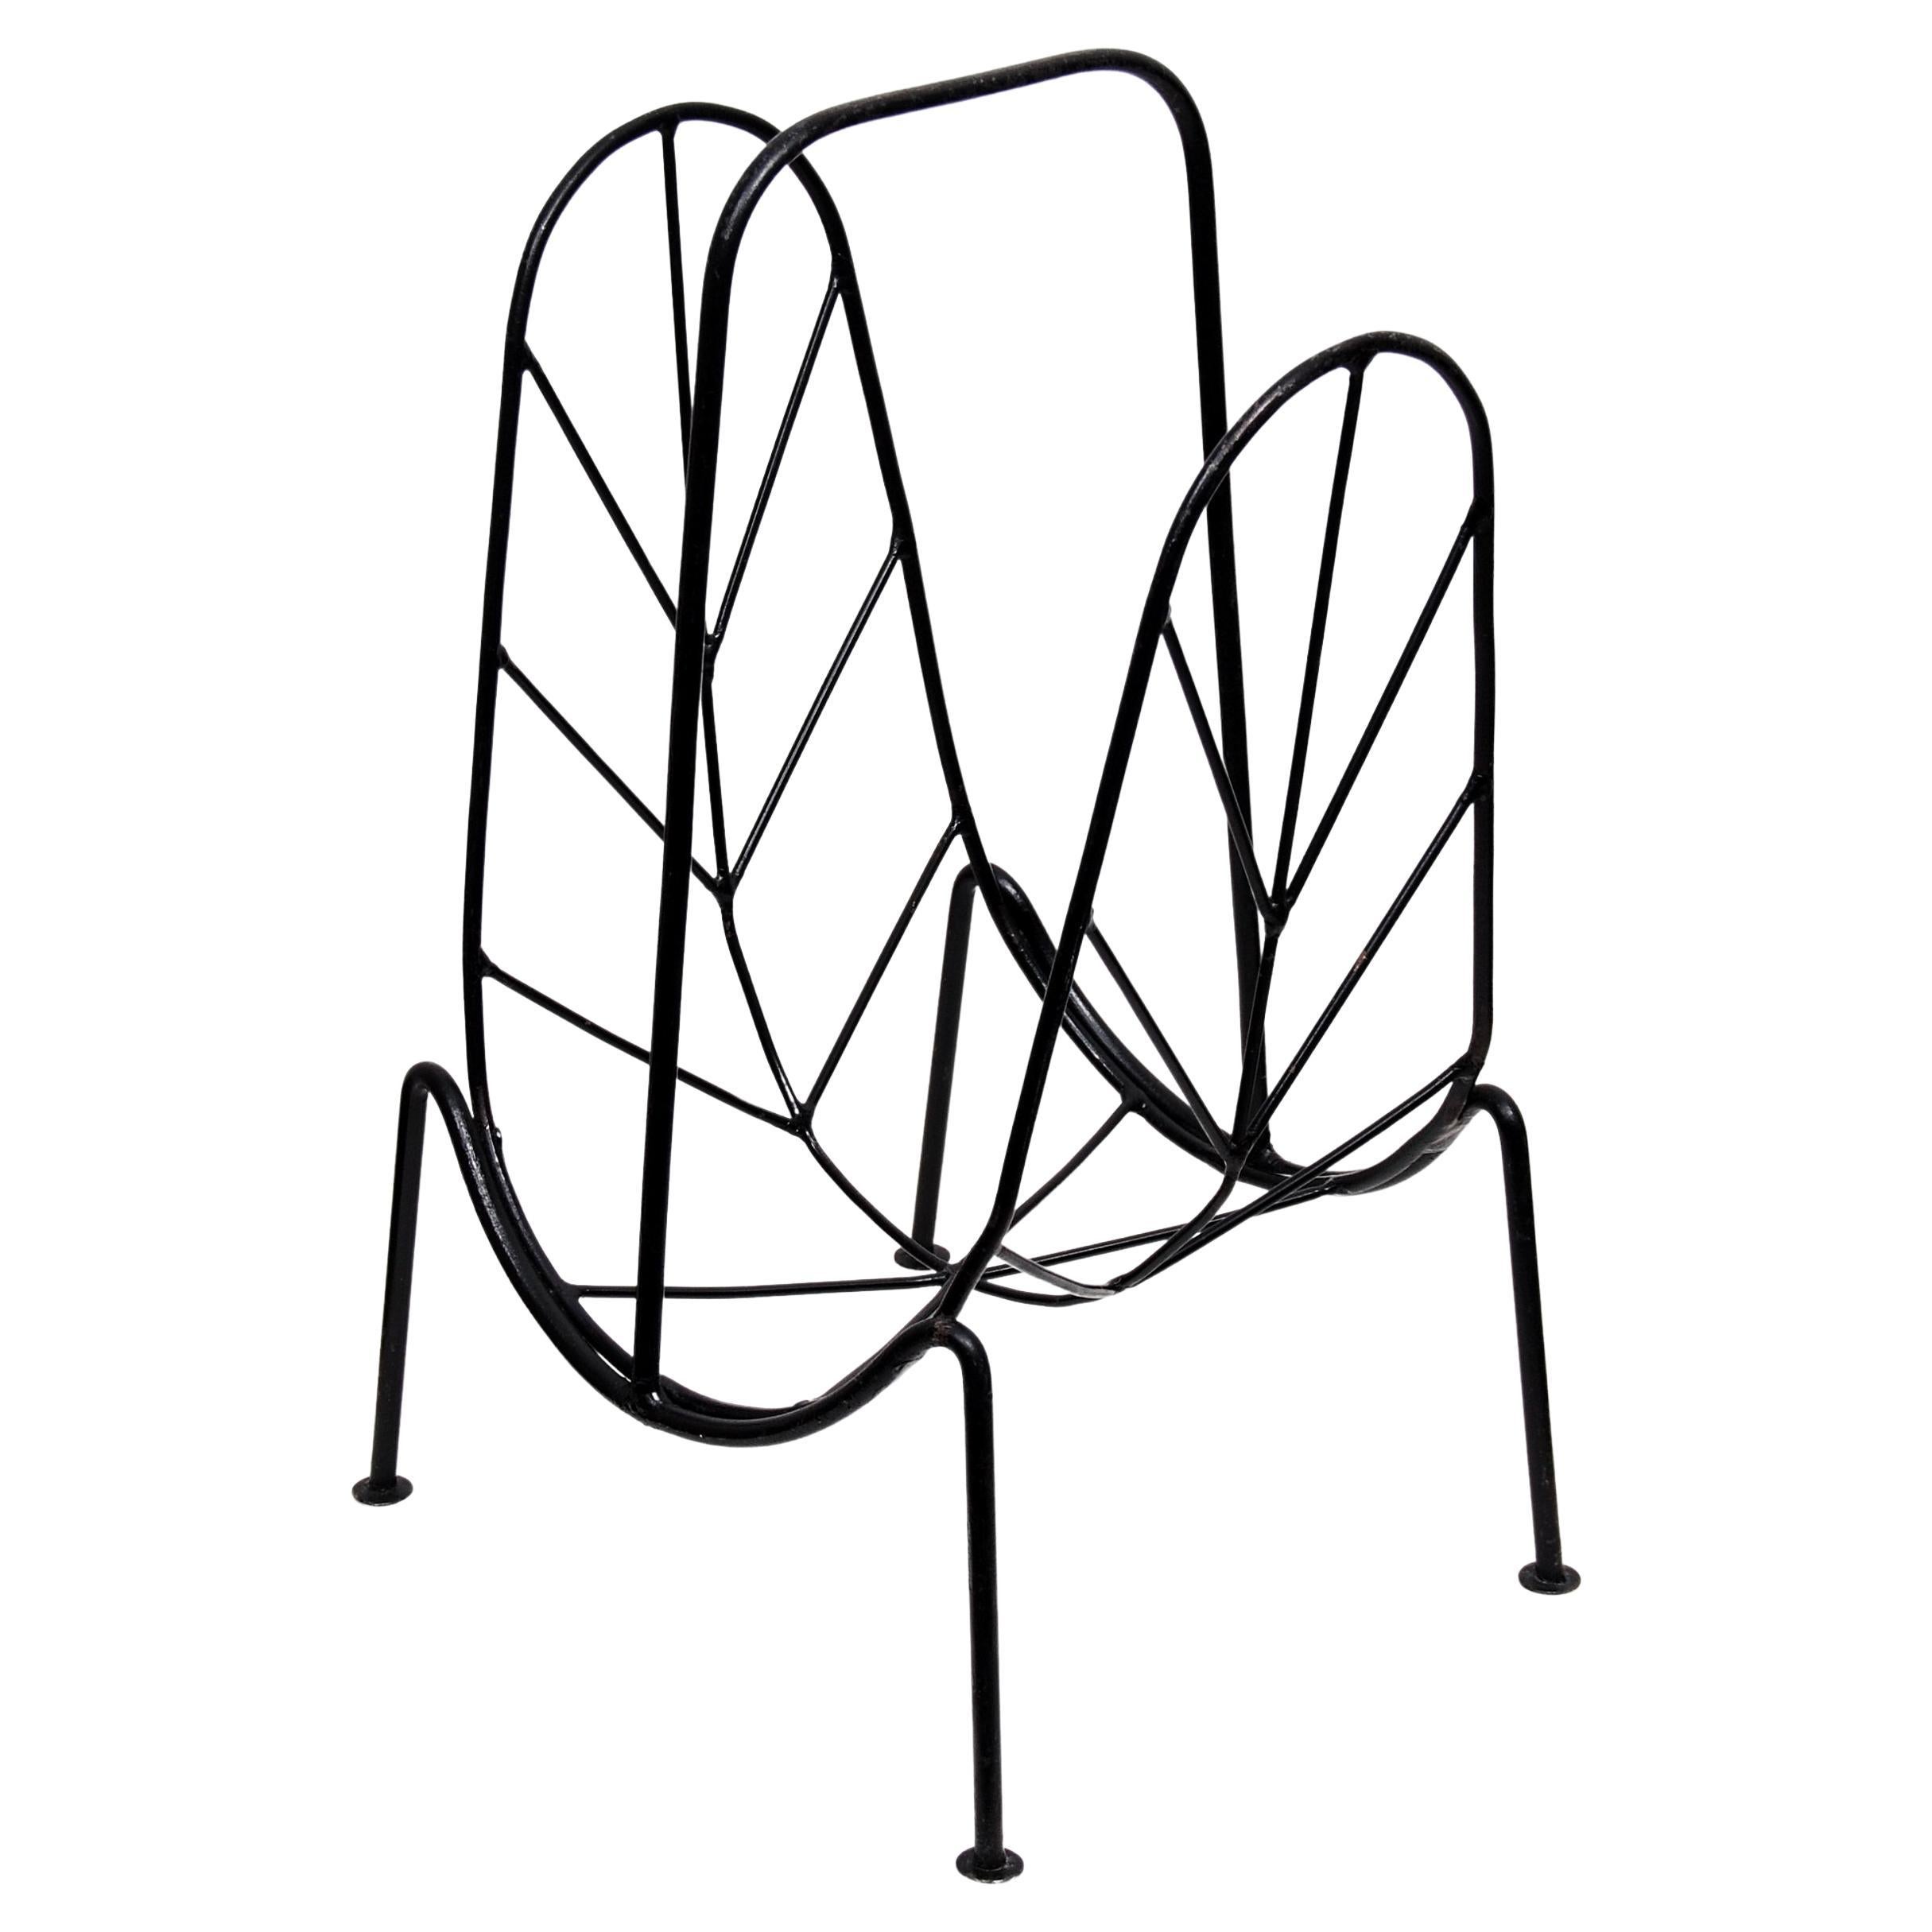 Mid-Century Modern magazine rack in the style of Jacques Adnet. Made in black iron and with beautiful leaf imitated sides. Stamped 'Made In Sweden' on the side of one leg.